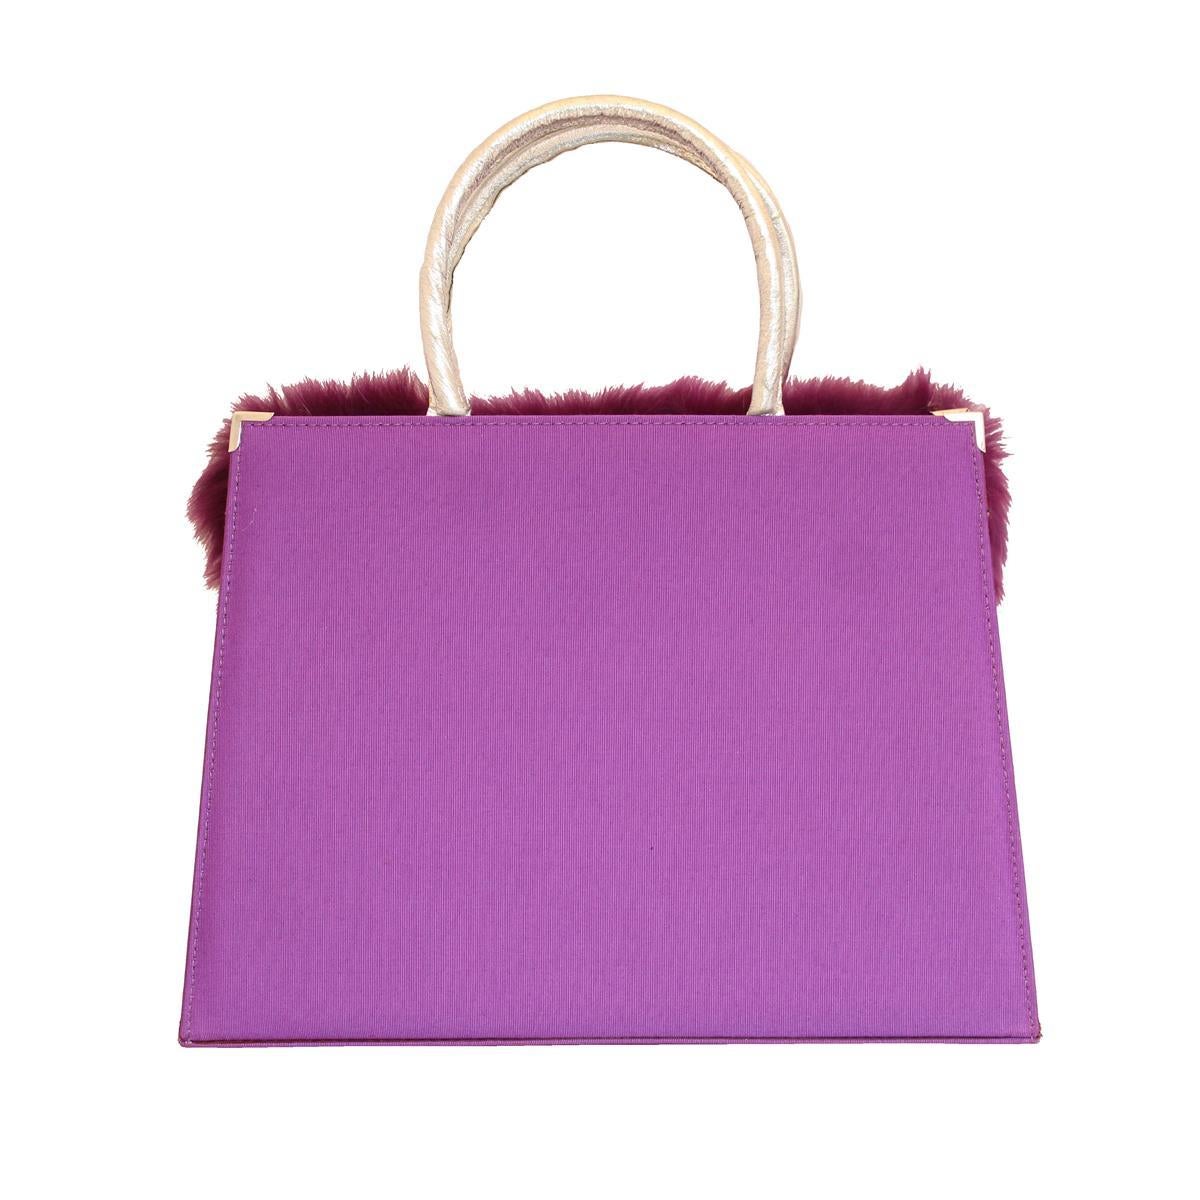 Stunning Carlo Zini Milano jewel bag
One of the world's best bijoux designers
Textile
Purple color
Real fox fur
White inserts
Wonderful swarovski crystals applications
Silver colored leather handles
Can be carried crossbody too
Internal zip